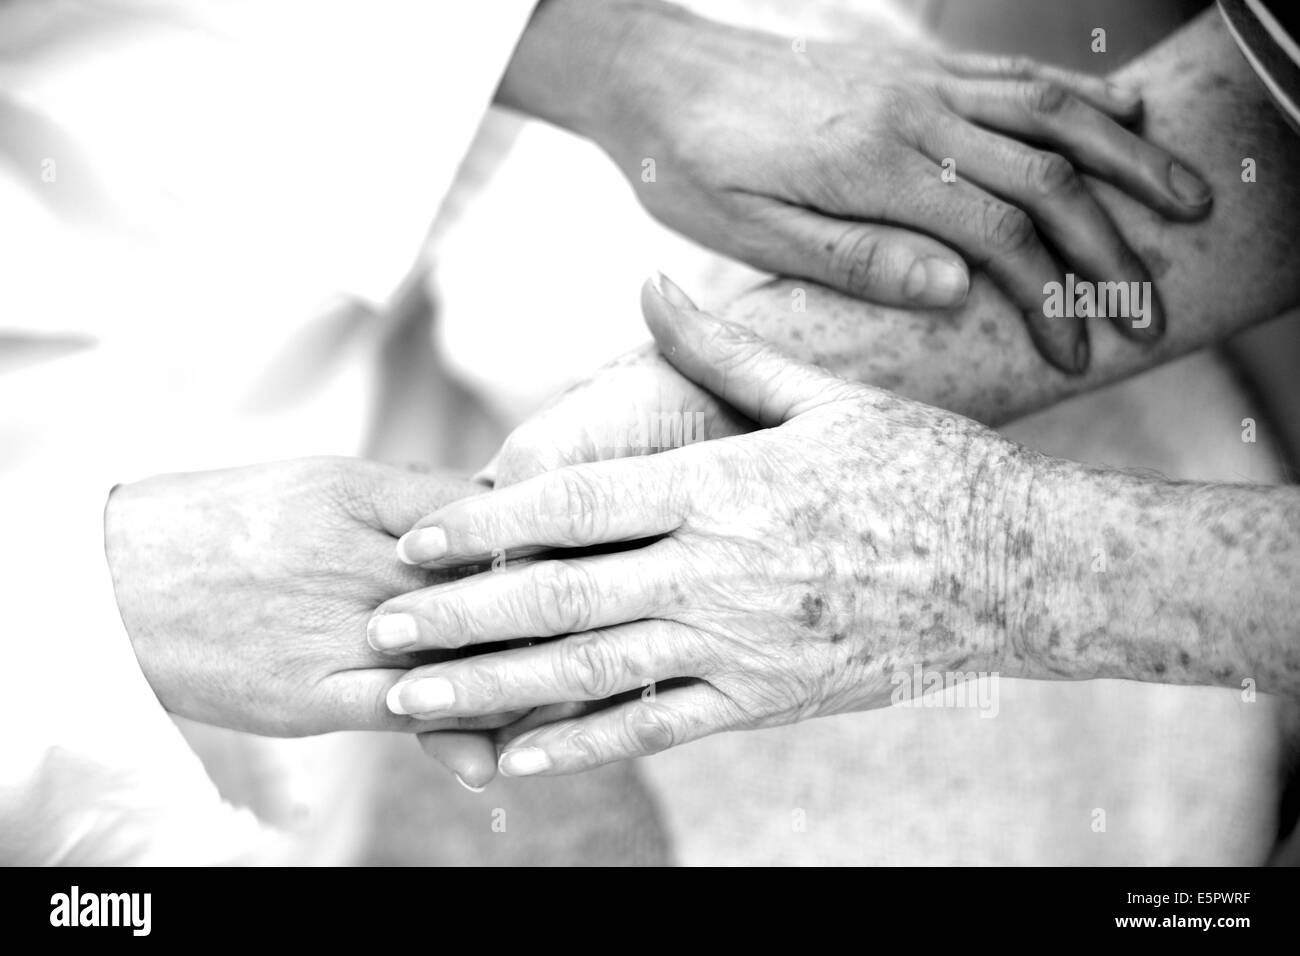 Holding hands of elderly person. Stock Photo